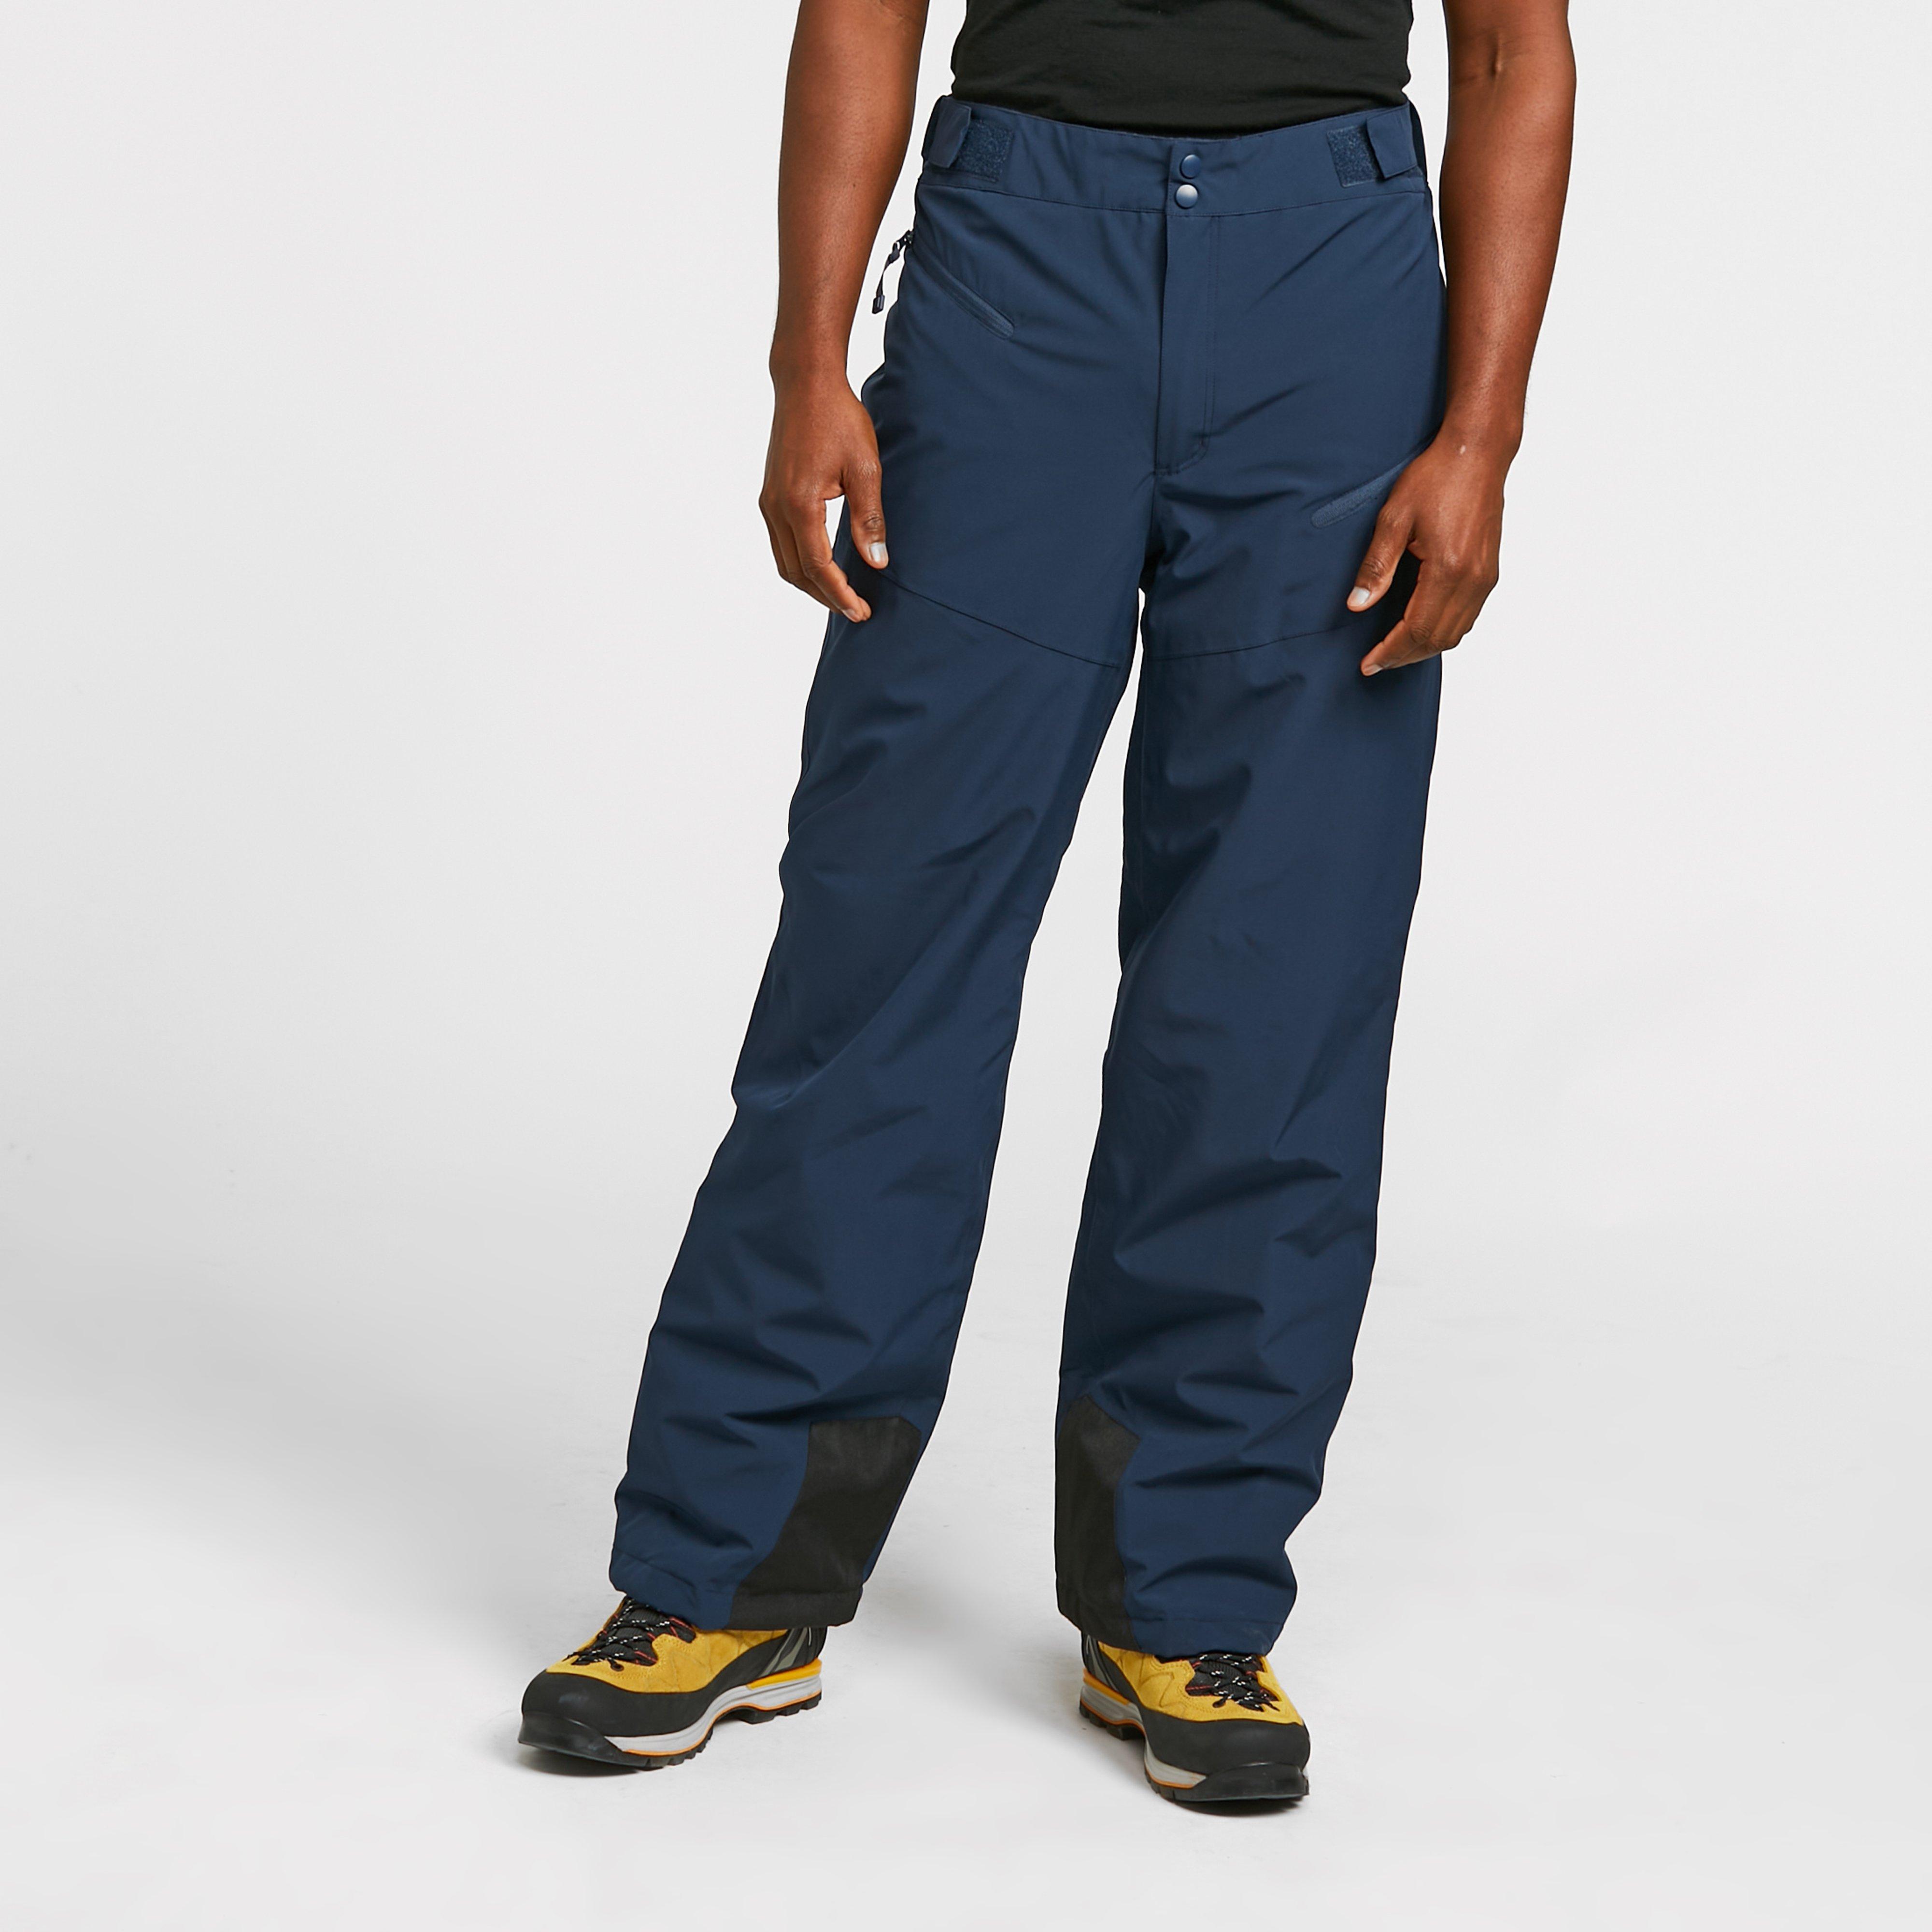 The Edge Mens Vail Stretch Salopettes - Navy/salopettes  Navy/salopettes